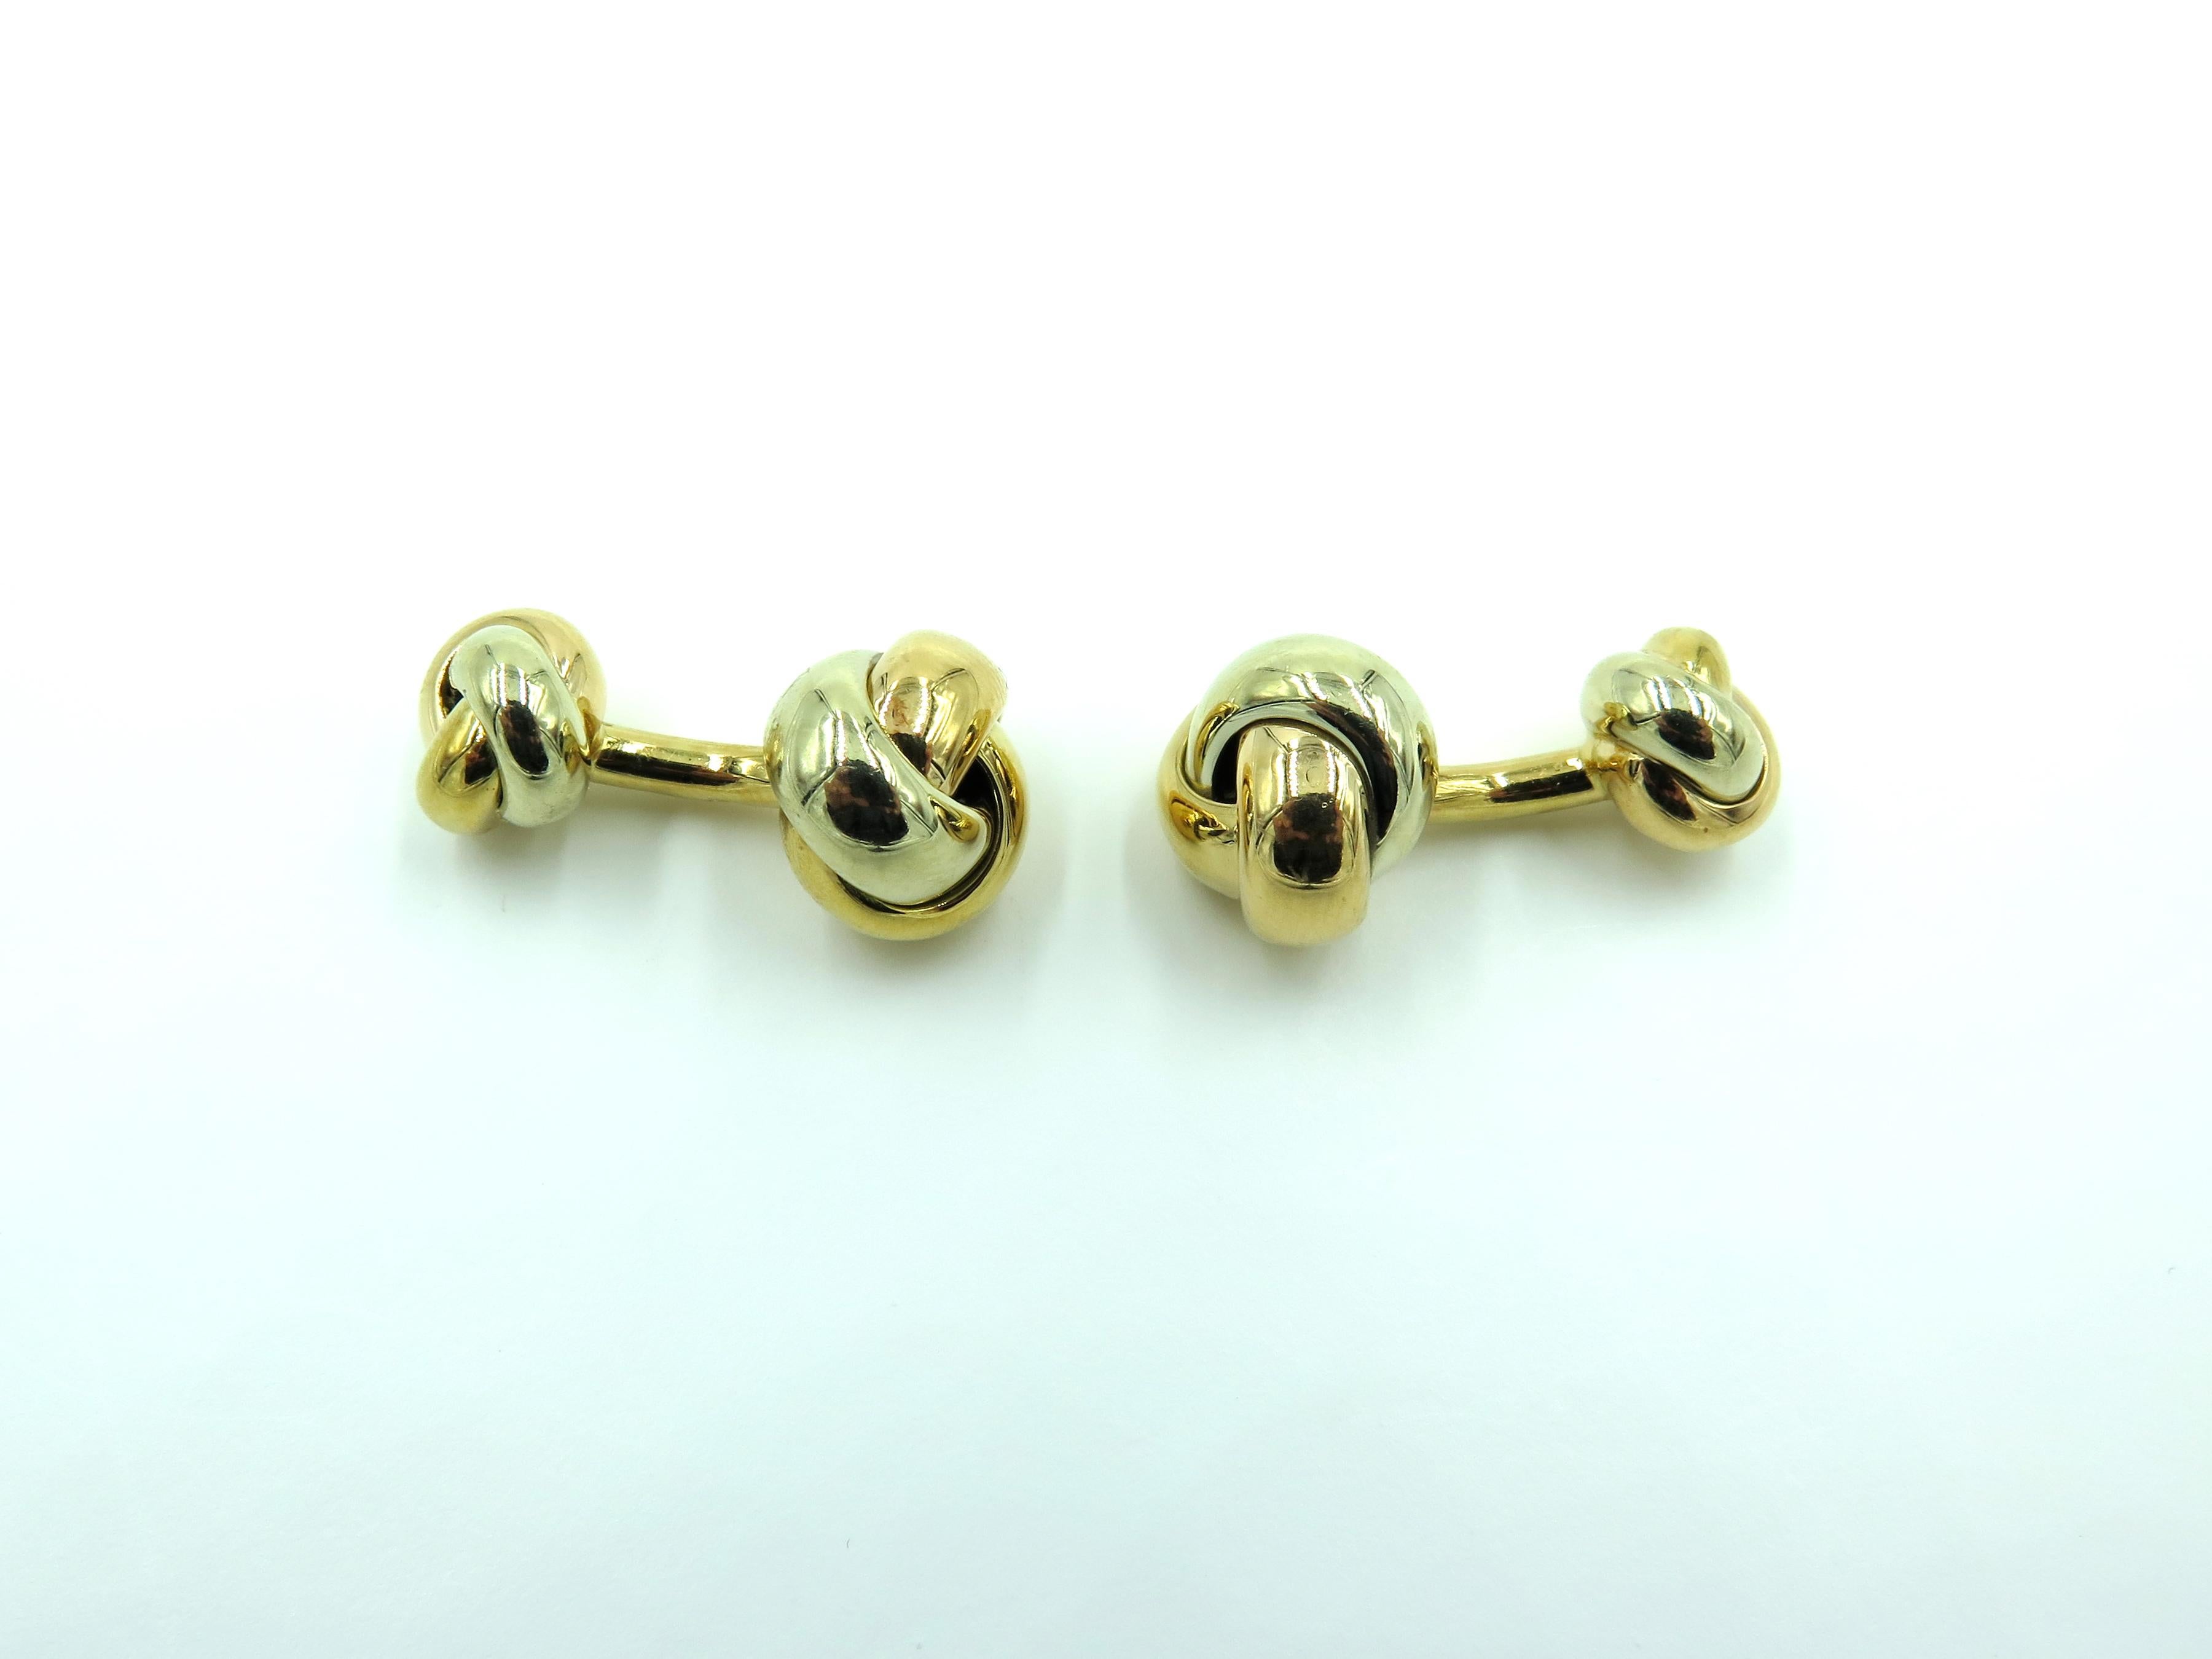 A pair of 18 karat tri color gold Trinity knot cufflinks. Cartier. Italy. Each designed as a rose, yellow and white gold knot, joined by a bar to a smaller knot. Larger links measures approximately 1/2 inch. Gross weight is approximately 19.0 grams.